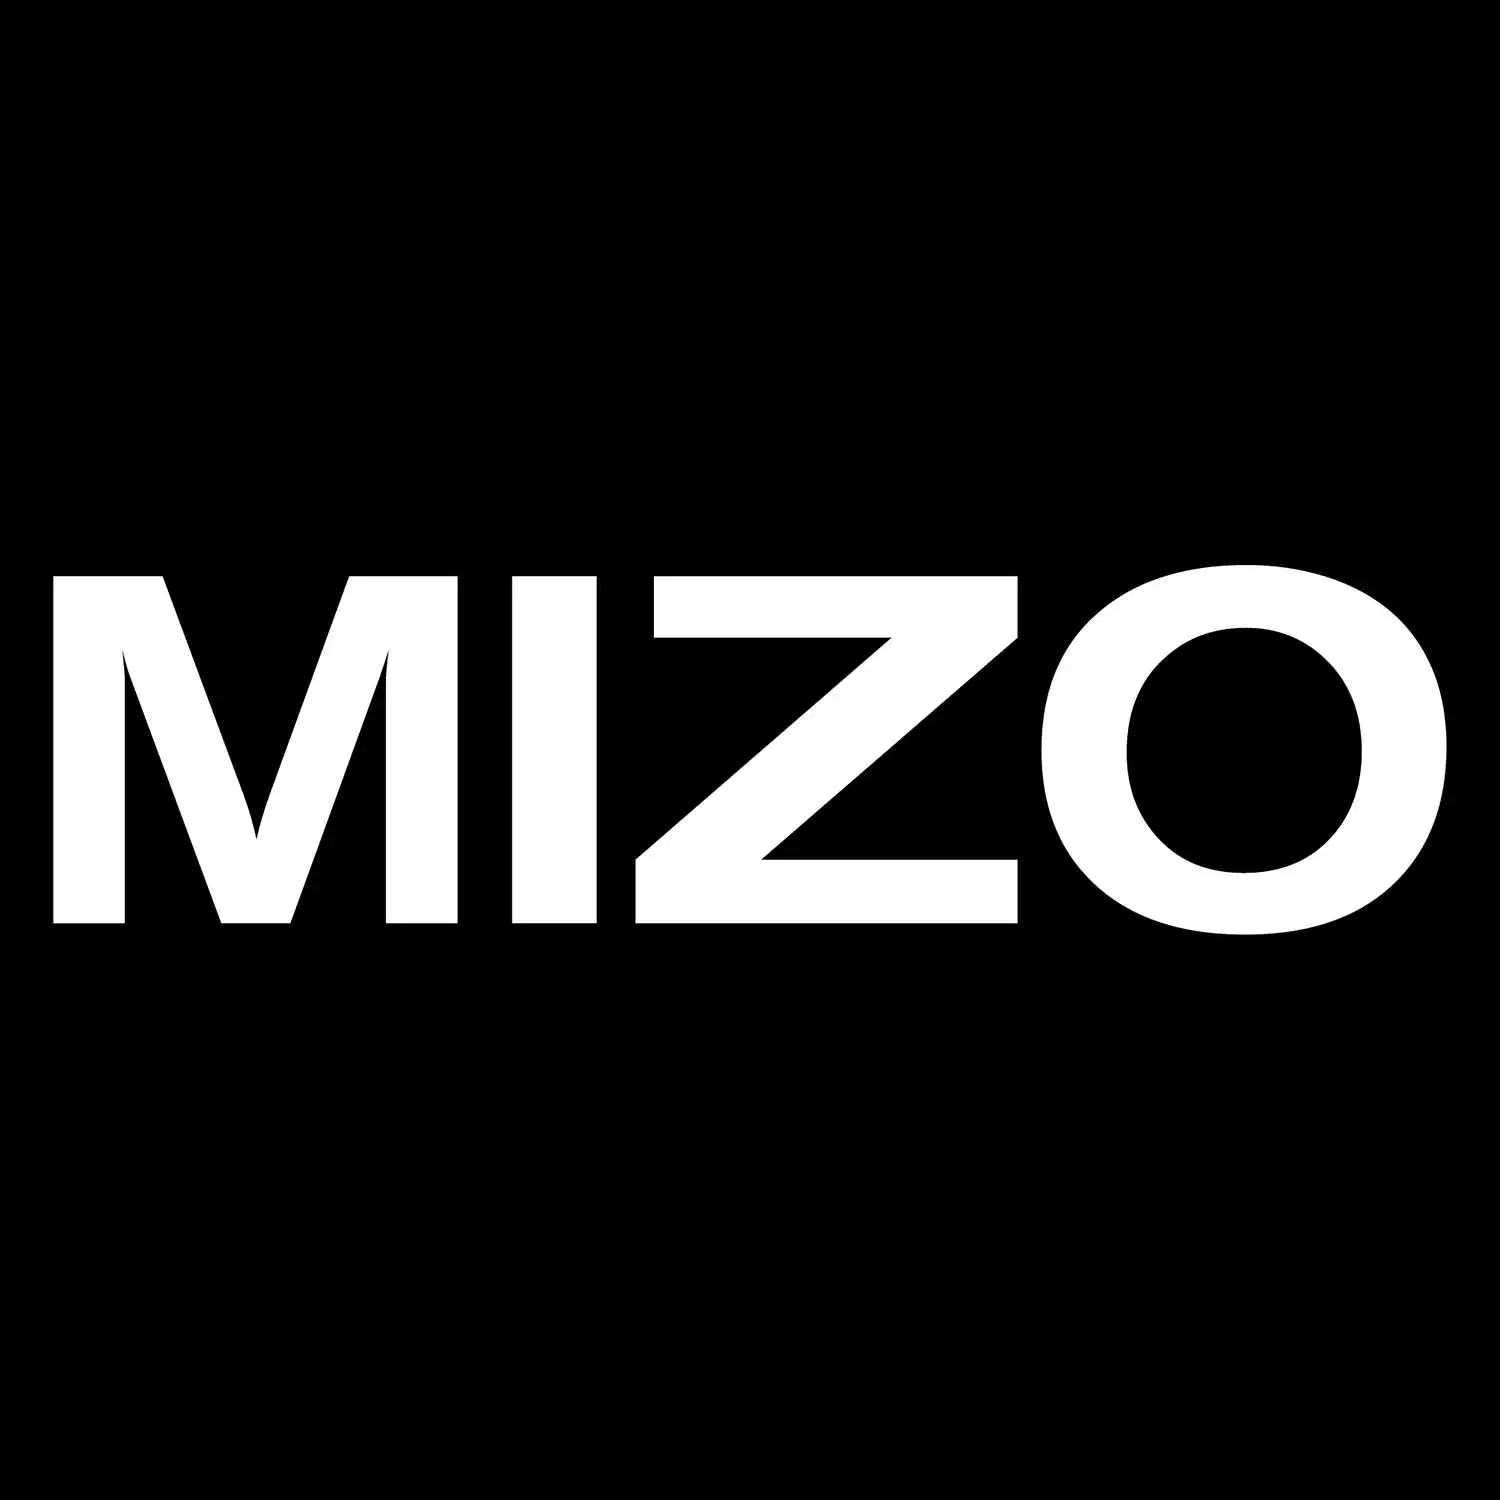 Mizo Disrupts Ready-to-Drink Category with New Asian-Inspired Hard